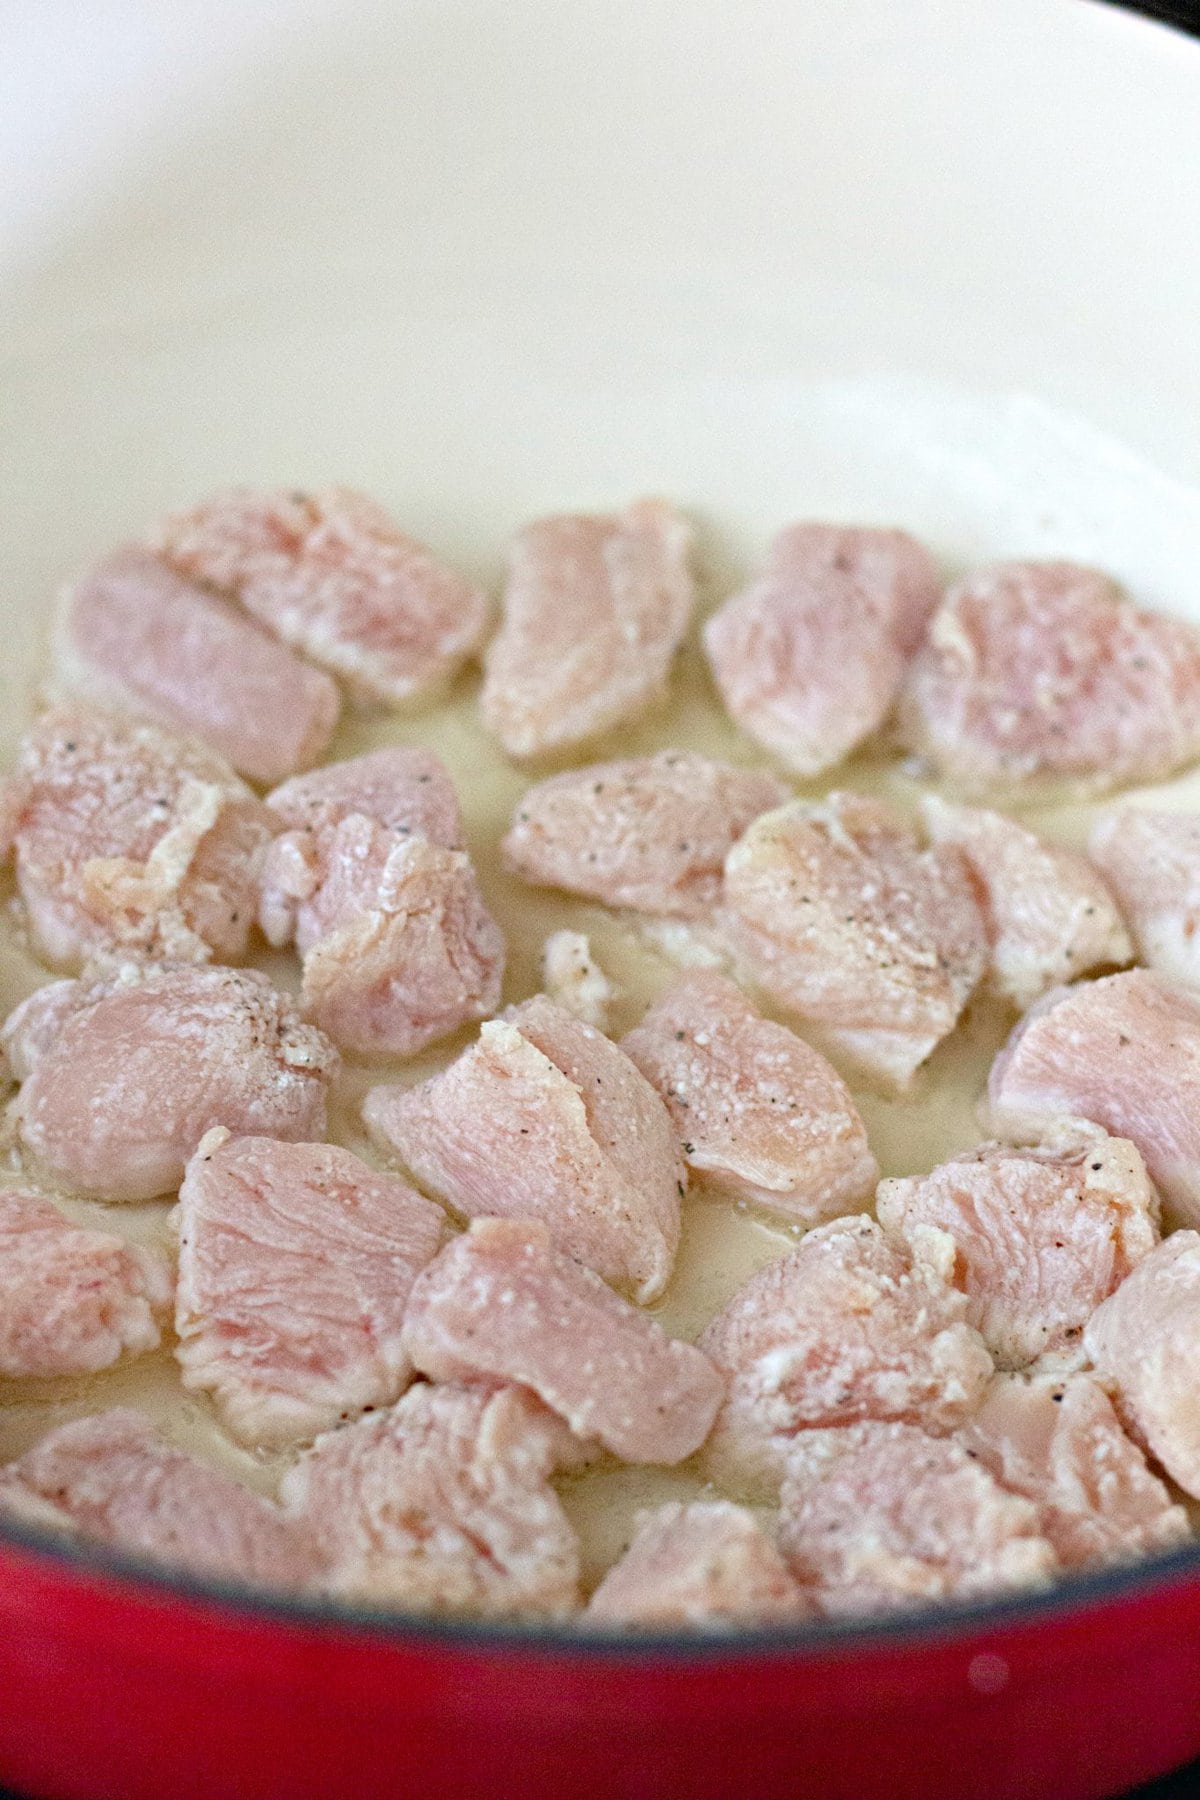 Chunks of chicken frying in oil in a pan